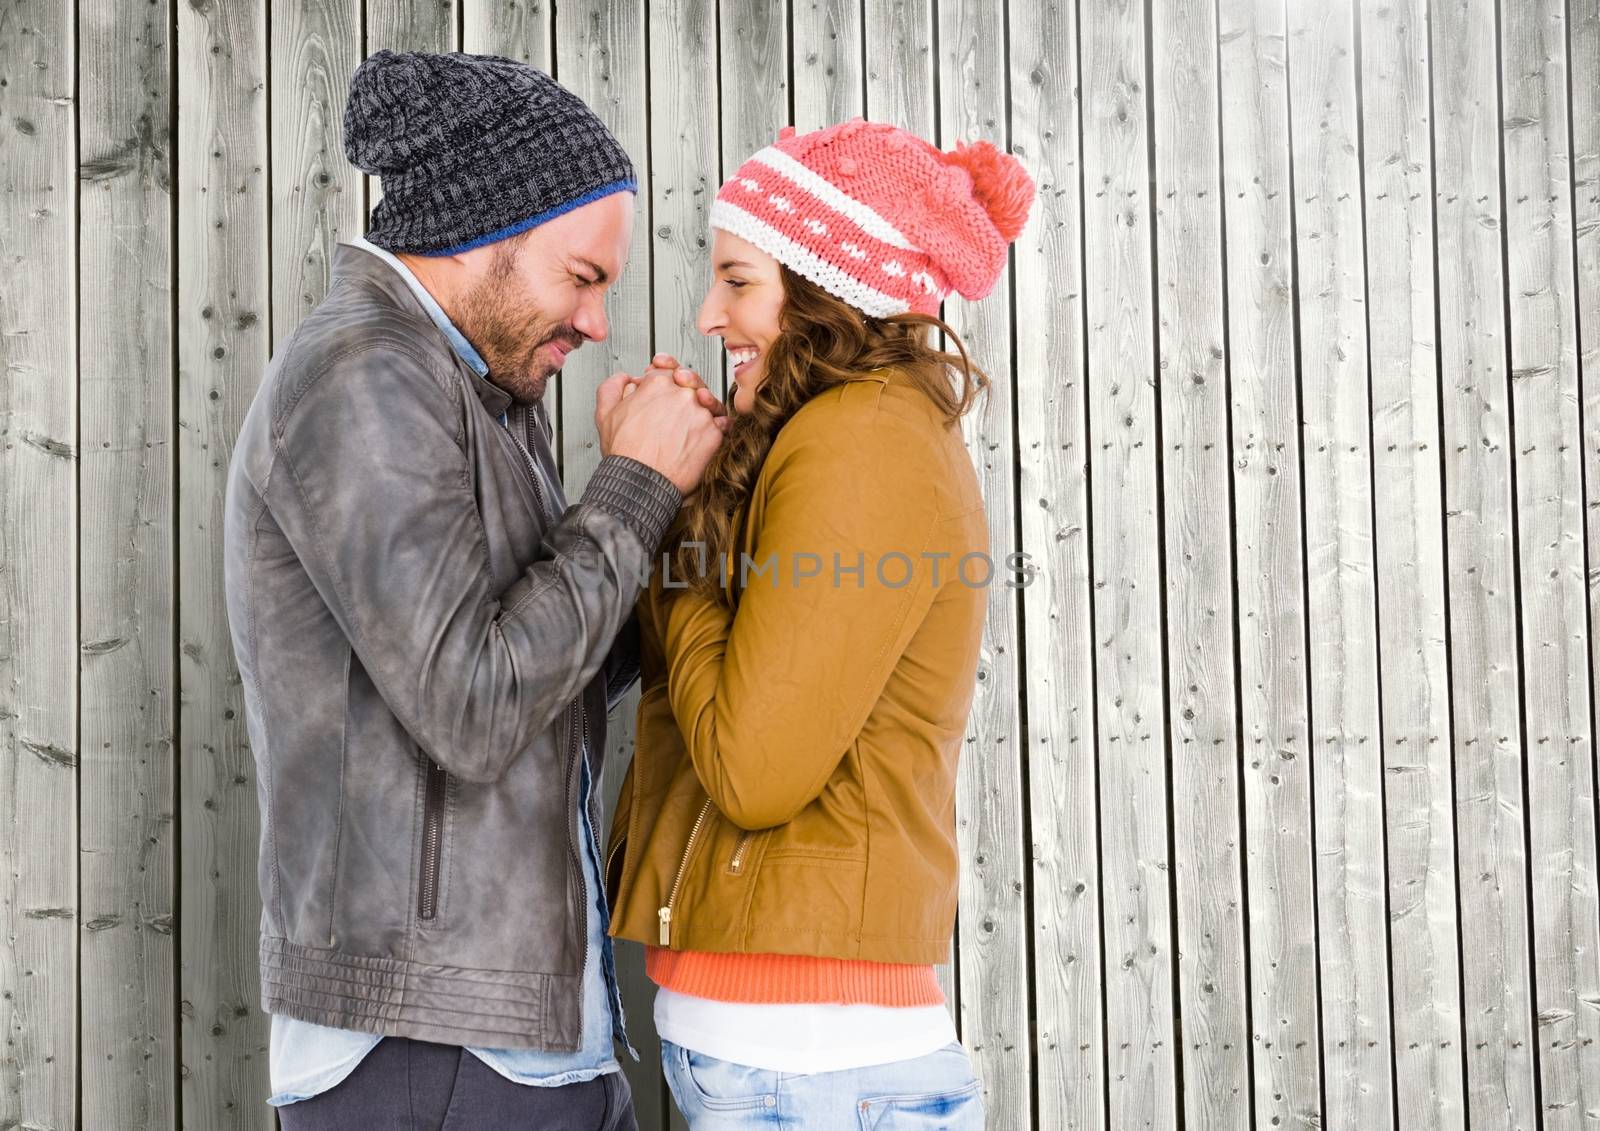 Romantic couple having fun together against wooden background